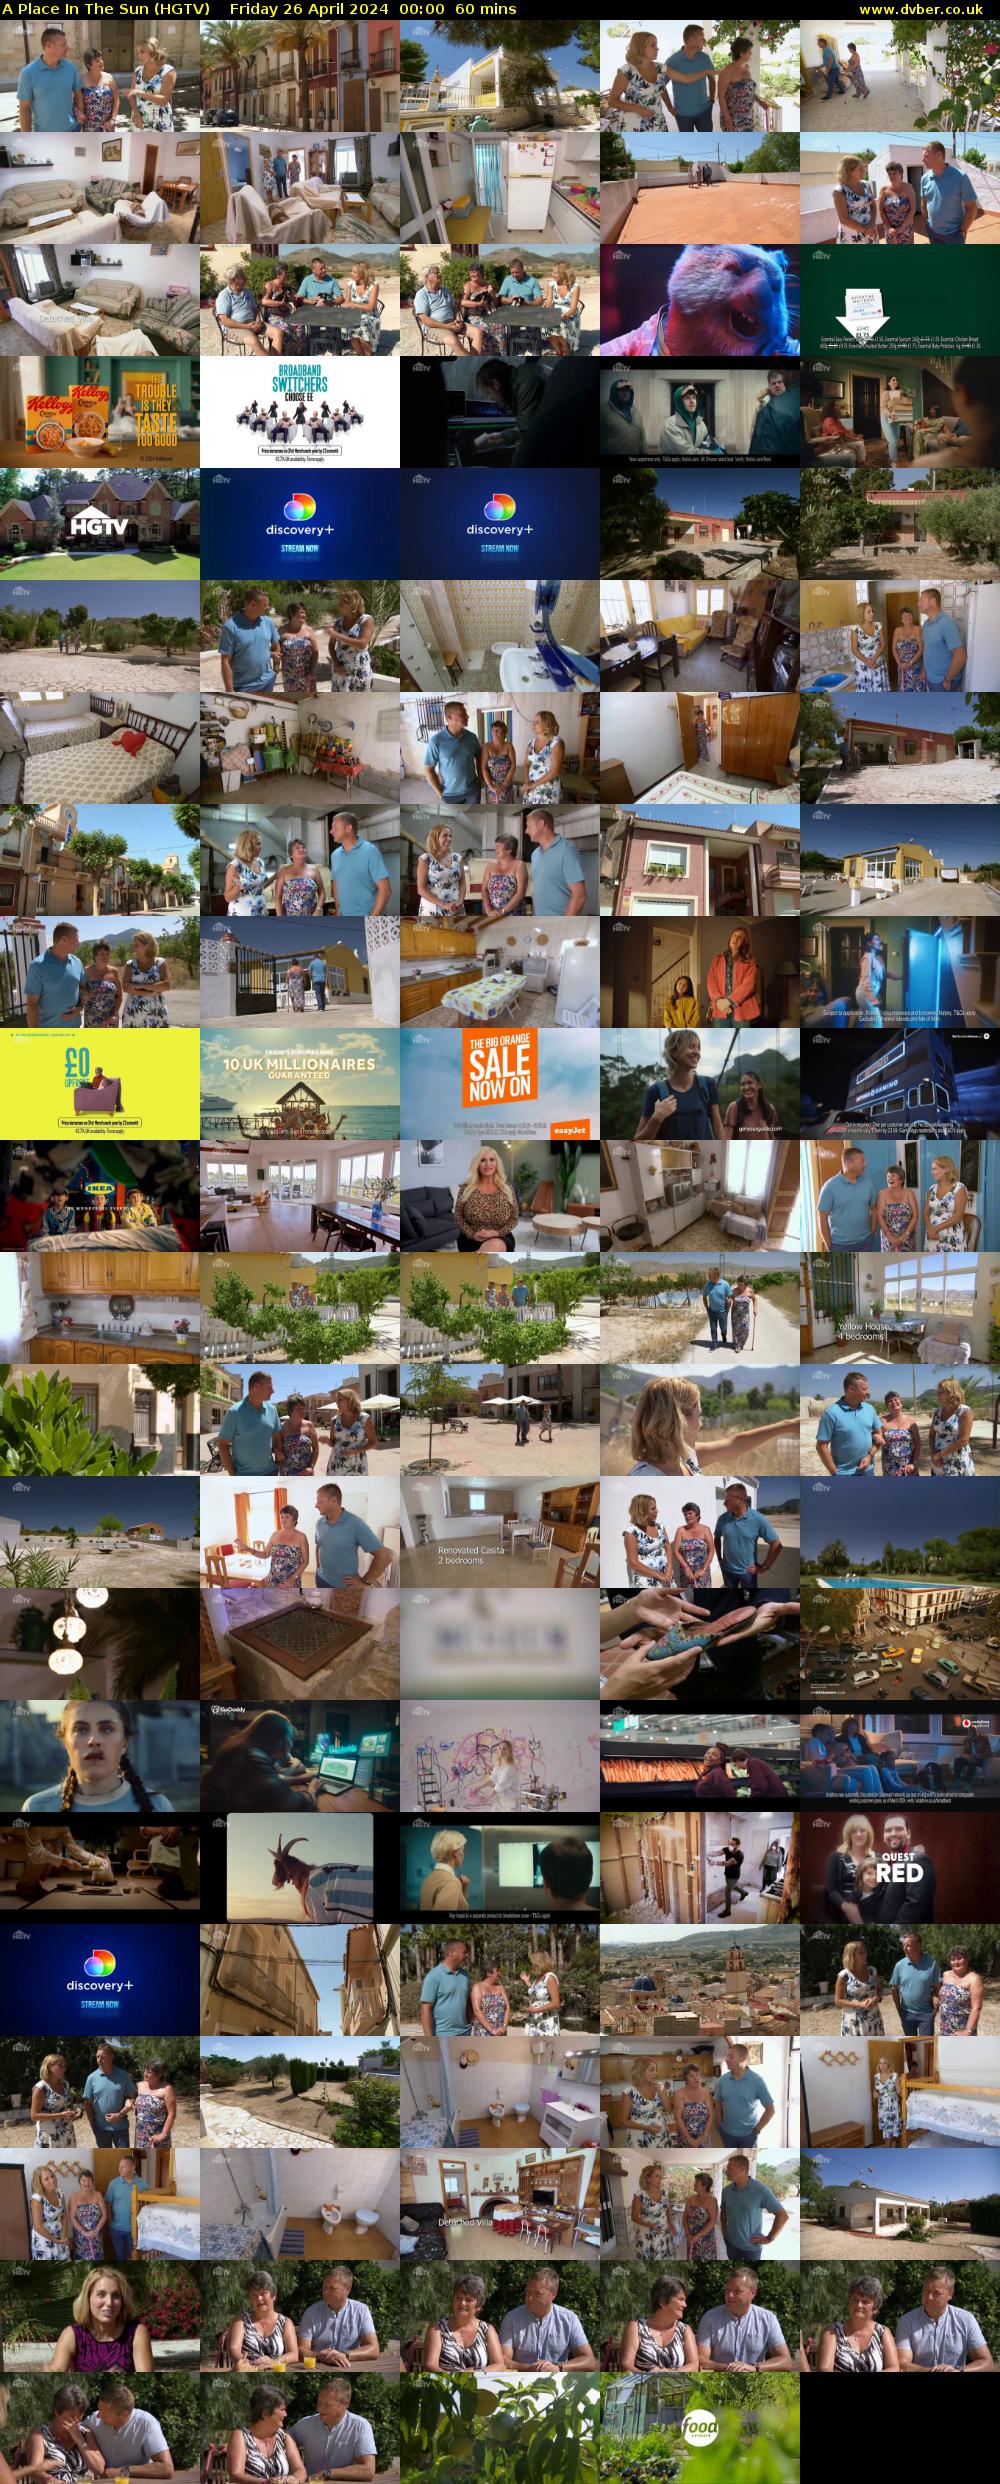 A Place In The Sun (HGTV) Friday 26 April 2024 00:00 - 01:00